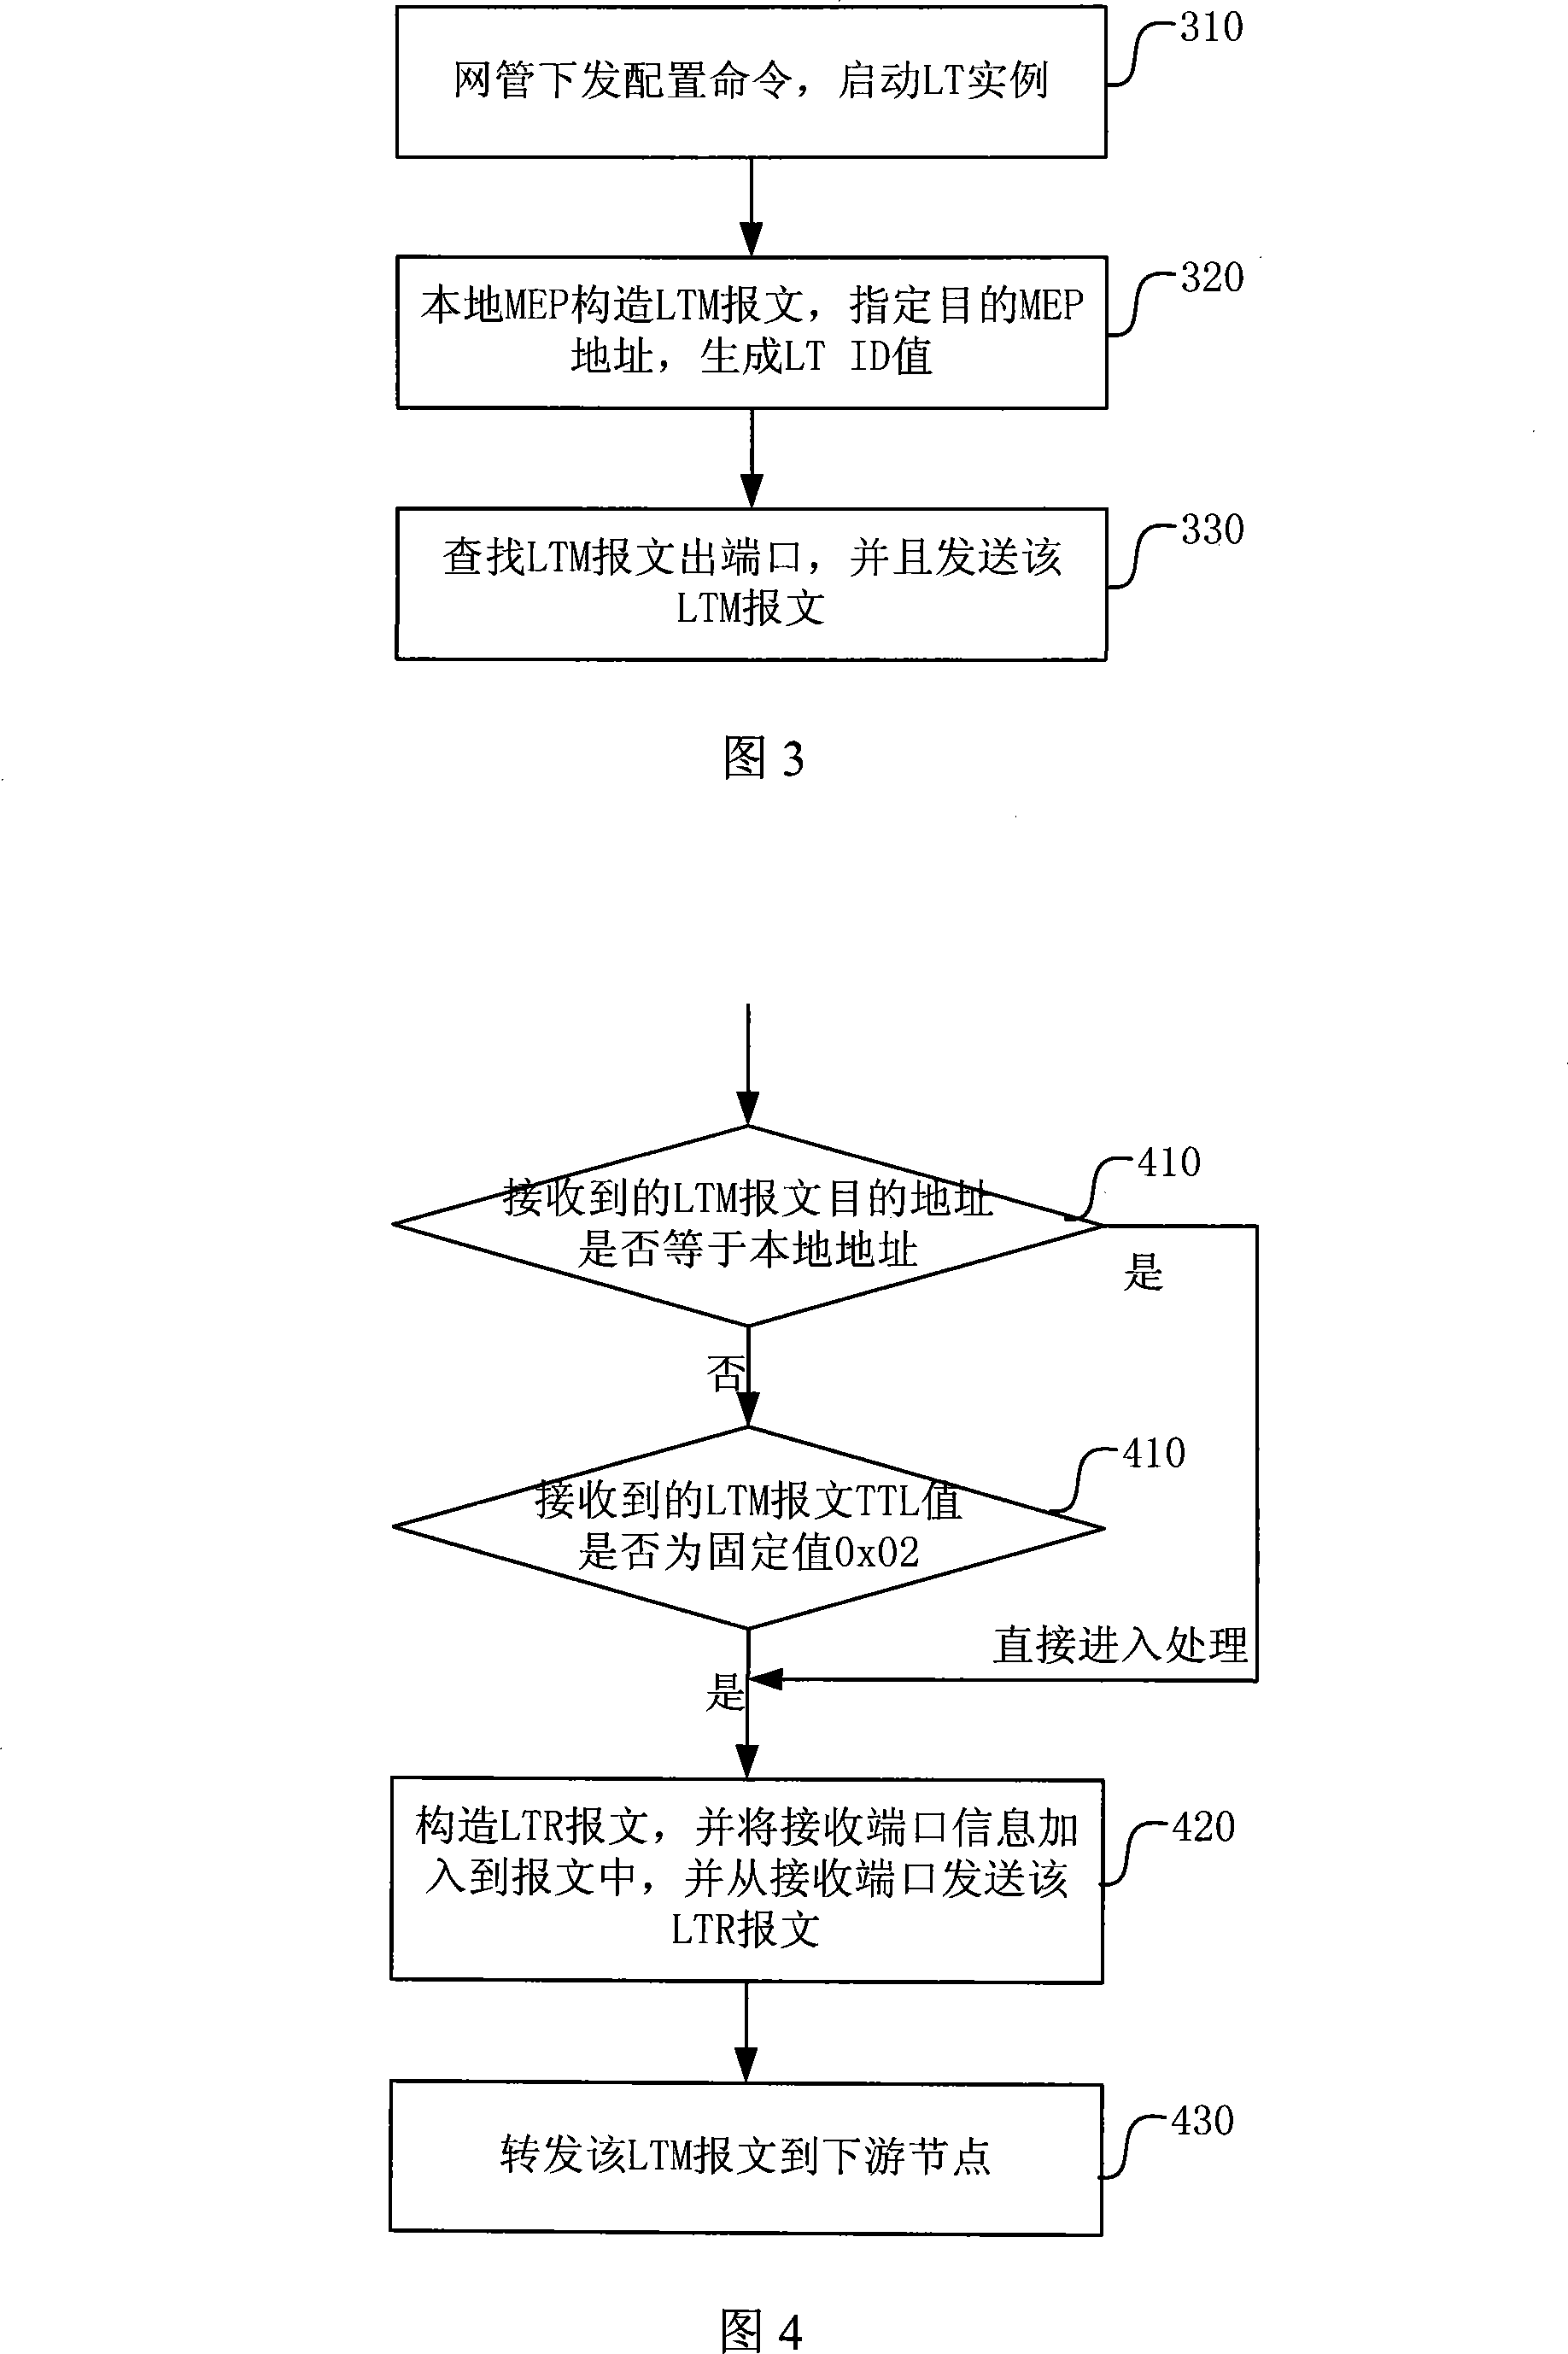 Method of implementing service link tracing based on T-MPLS packet transfer network